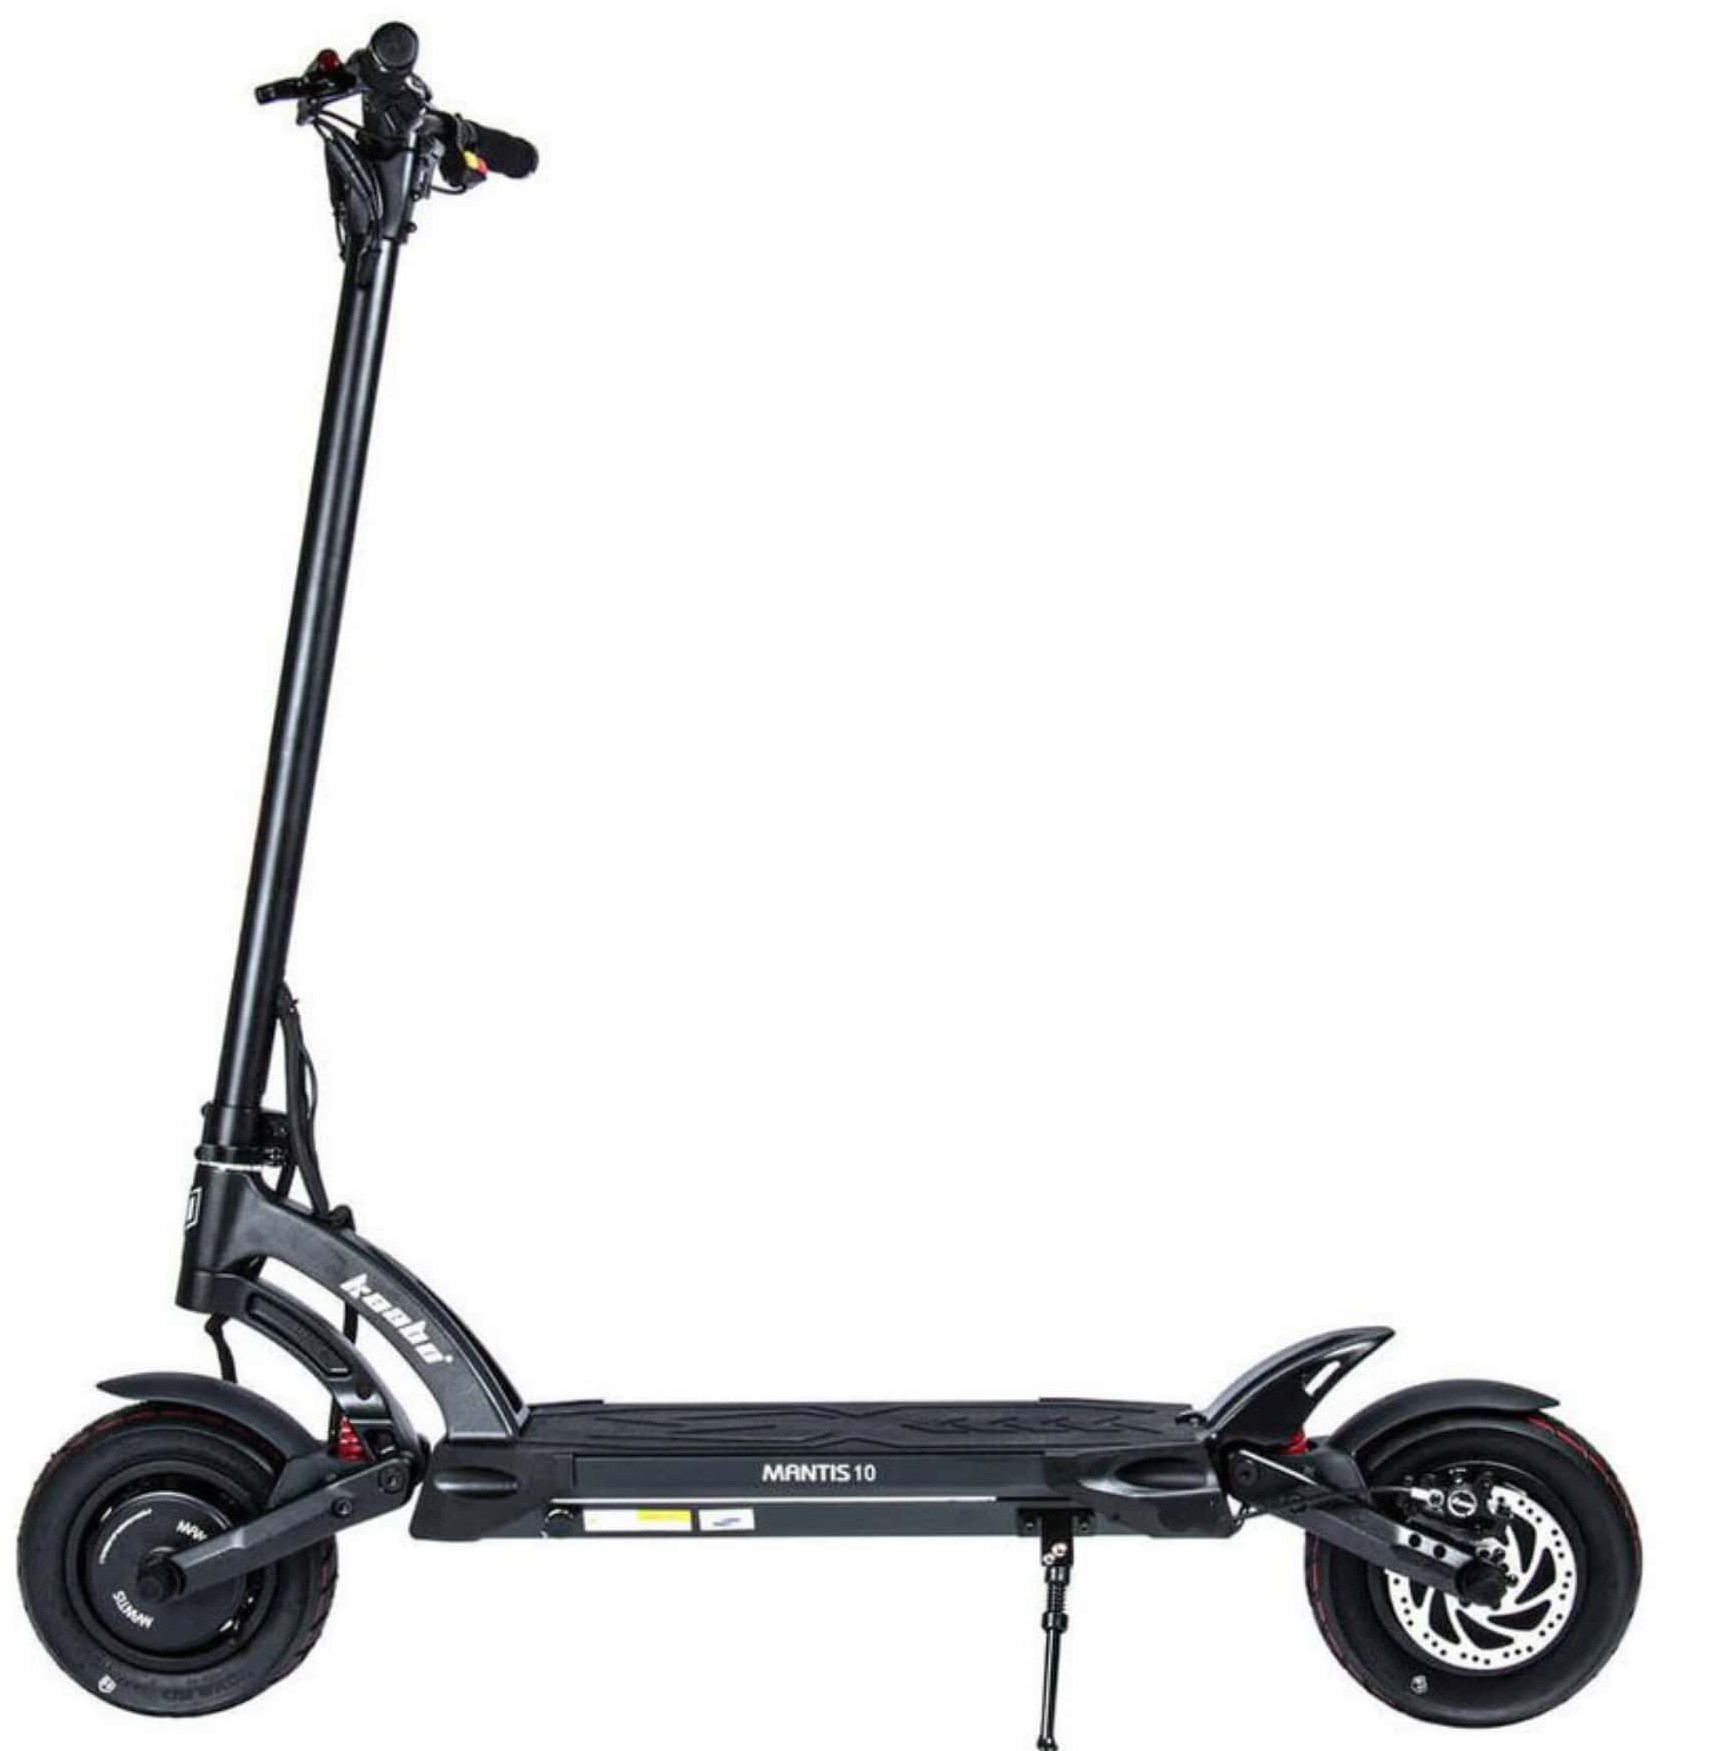 Kaabo Mantis Pro electric scooter